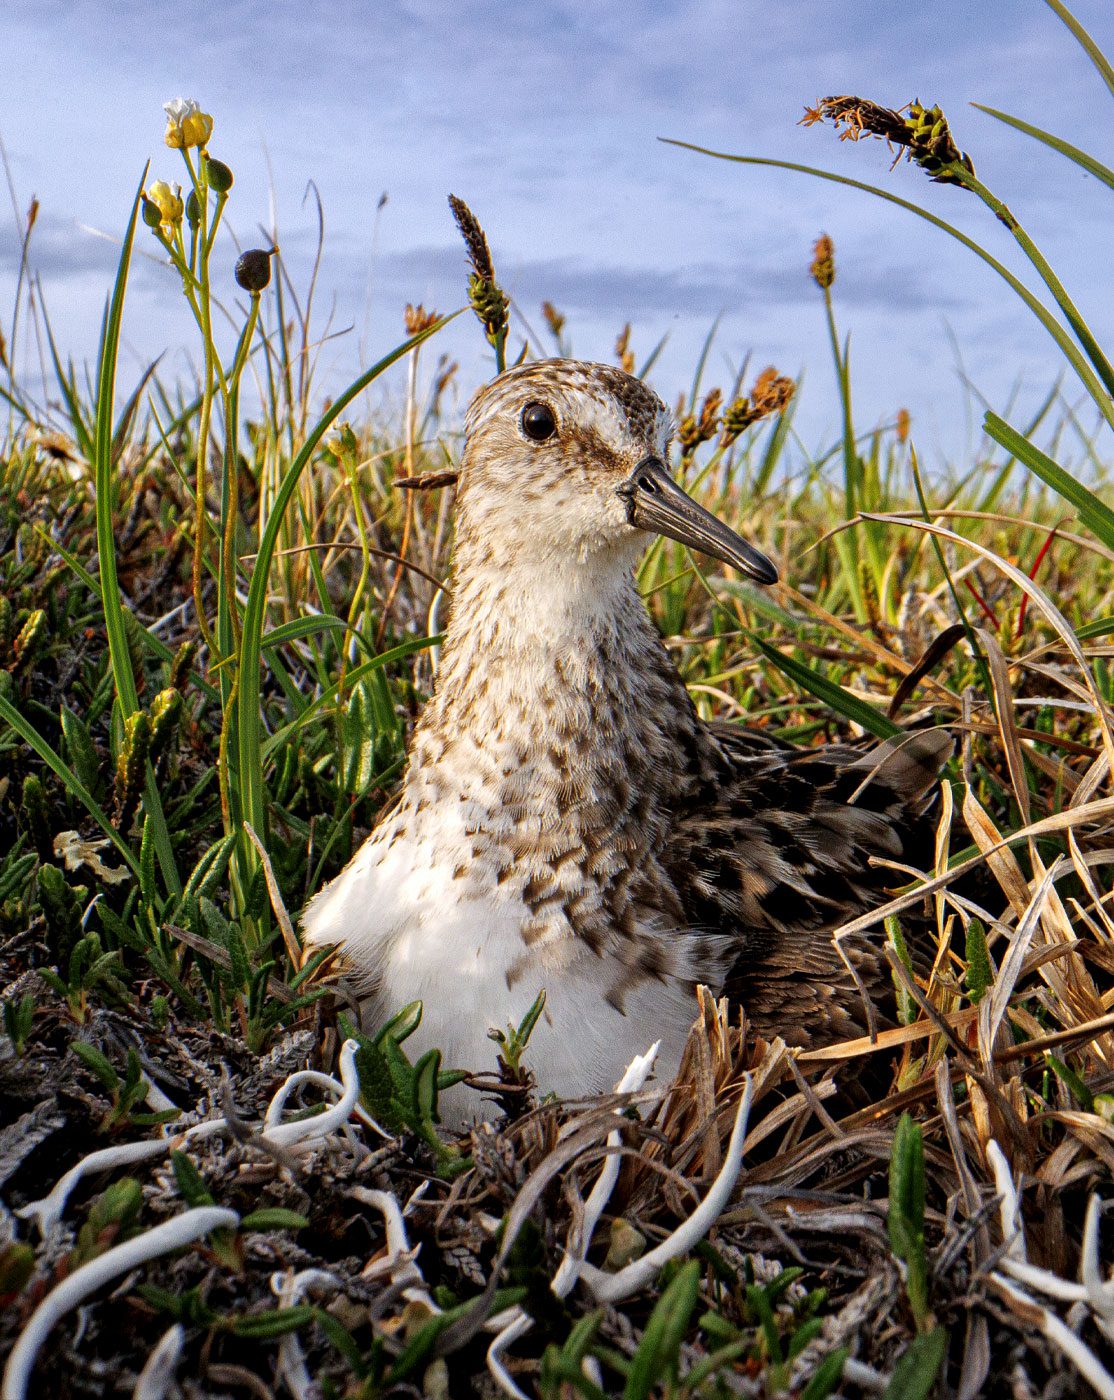 A beige and cream speckled bird wits on a nest in the grass.